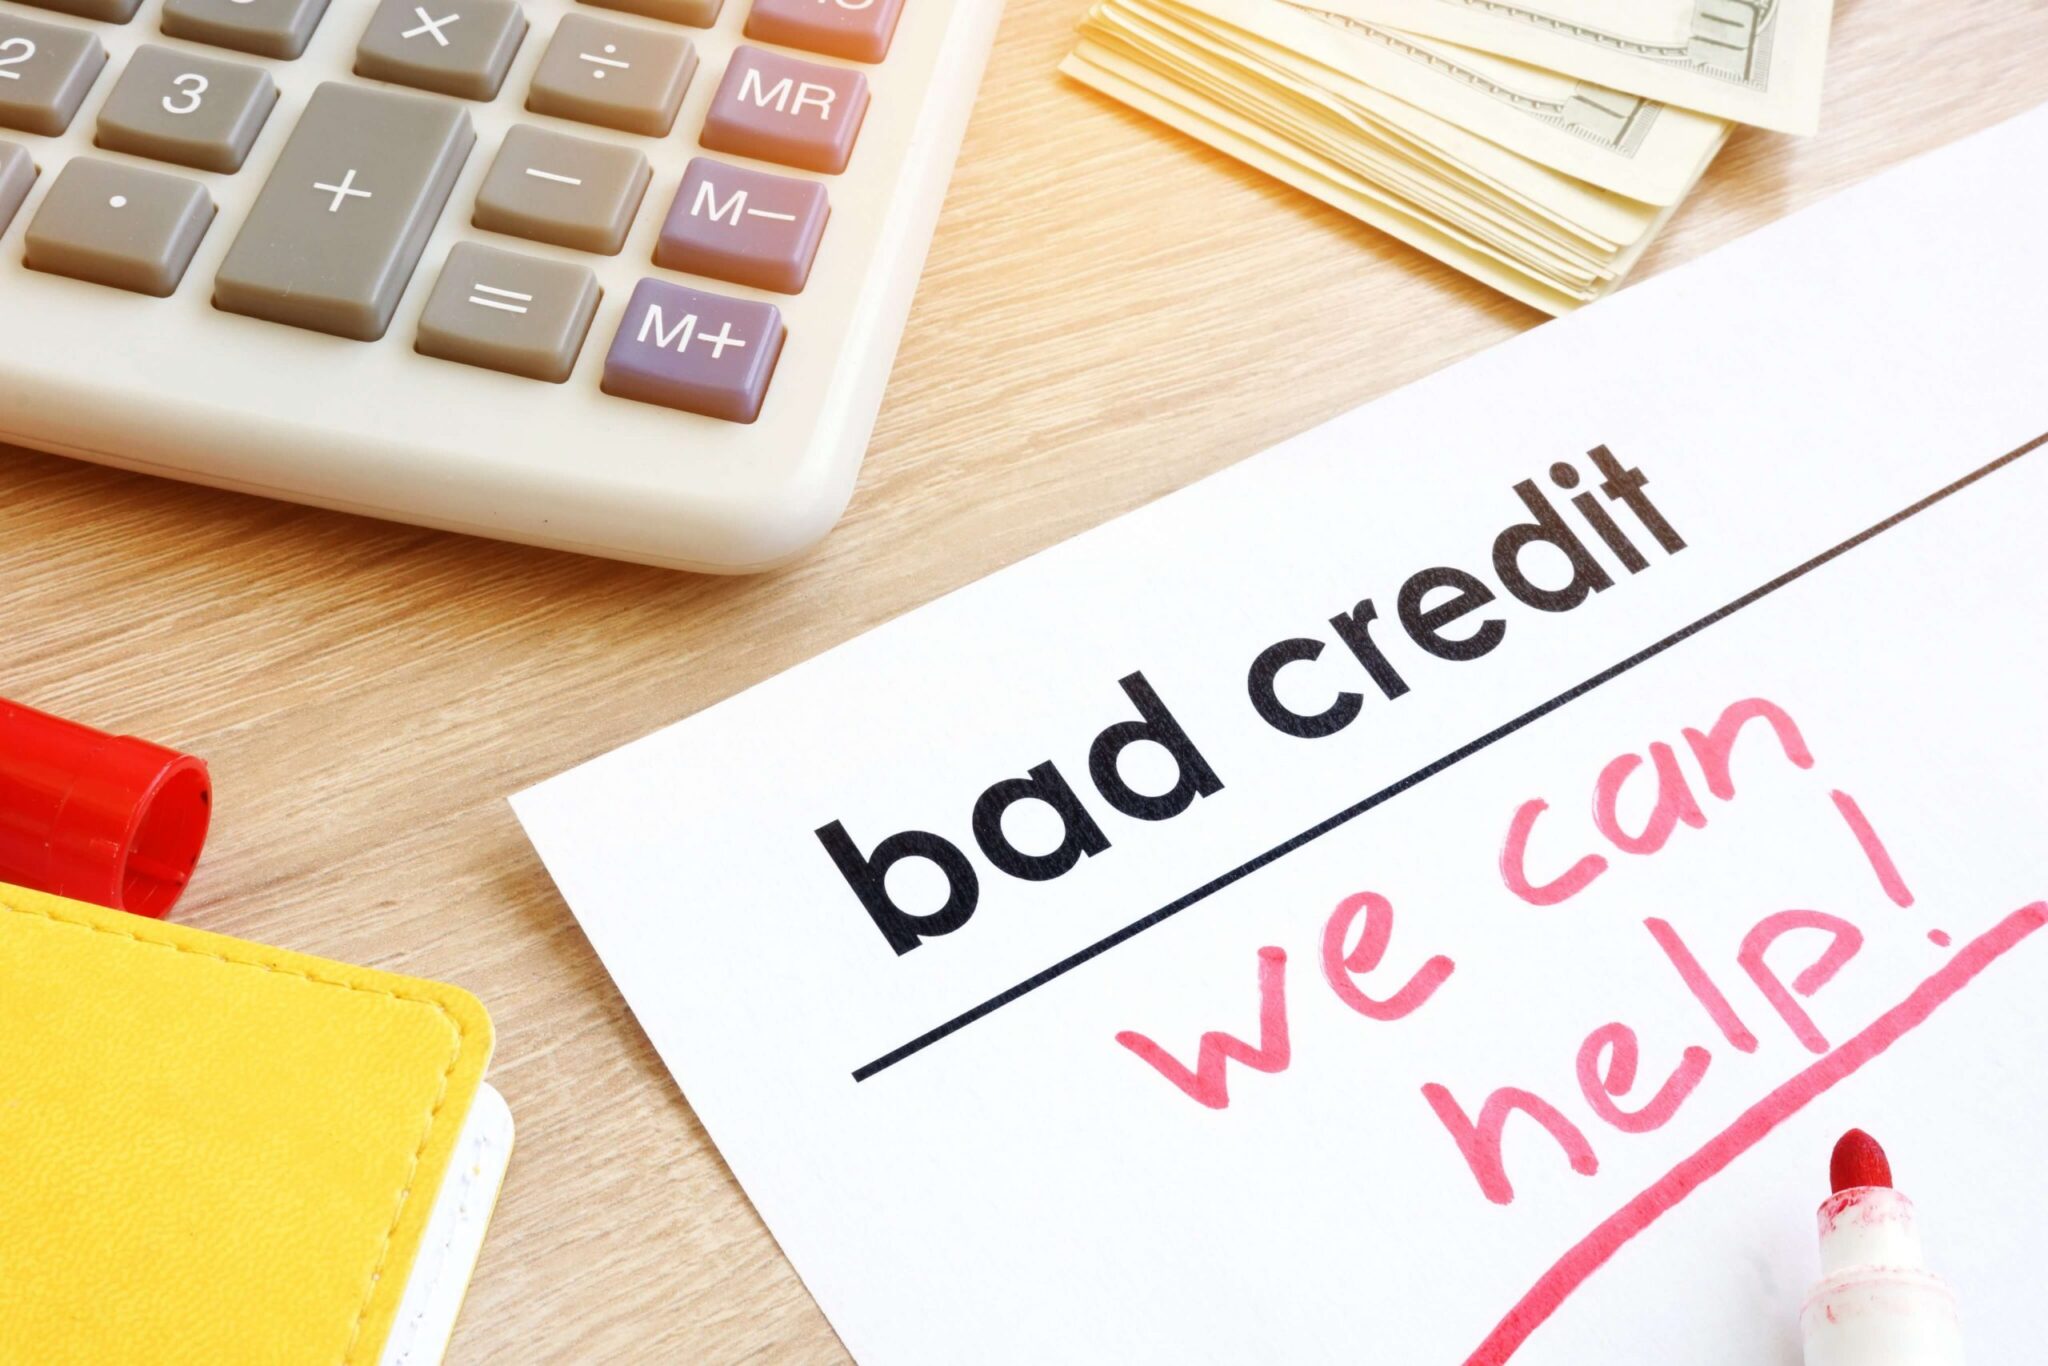 Remortgage with bad credit score